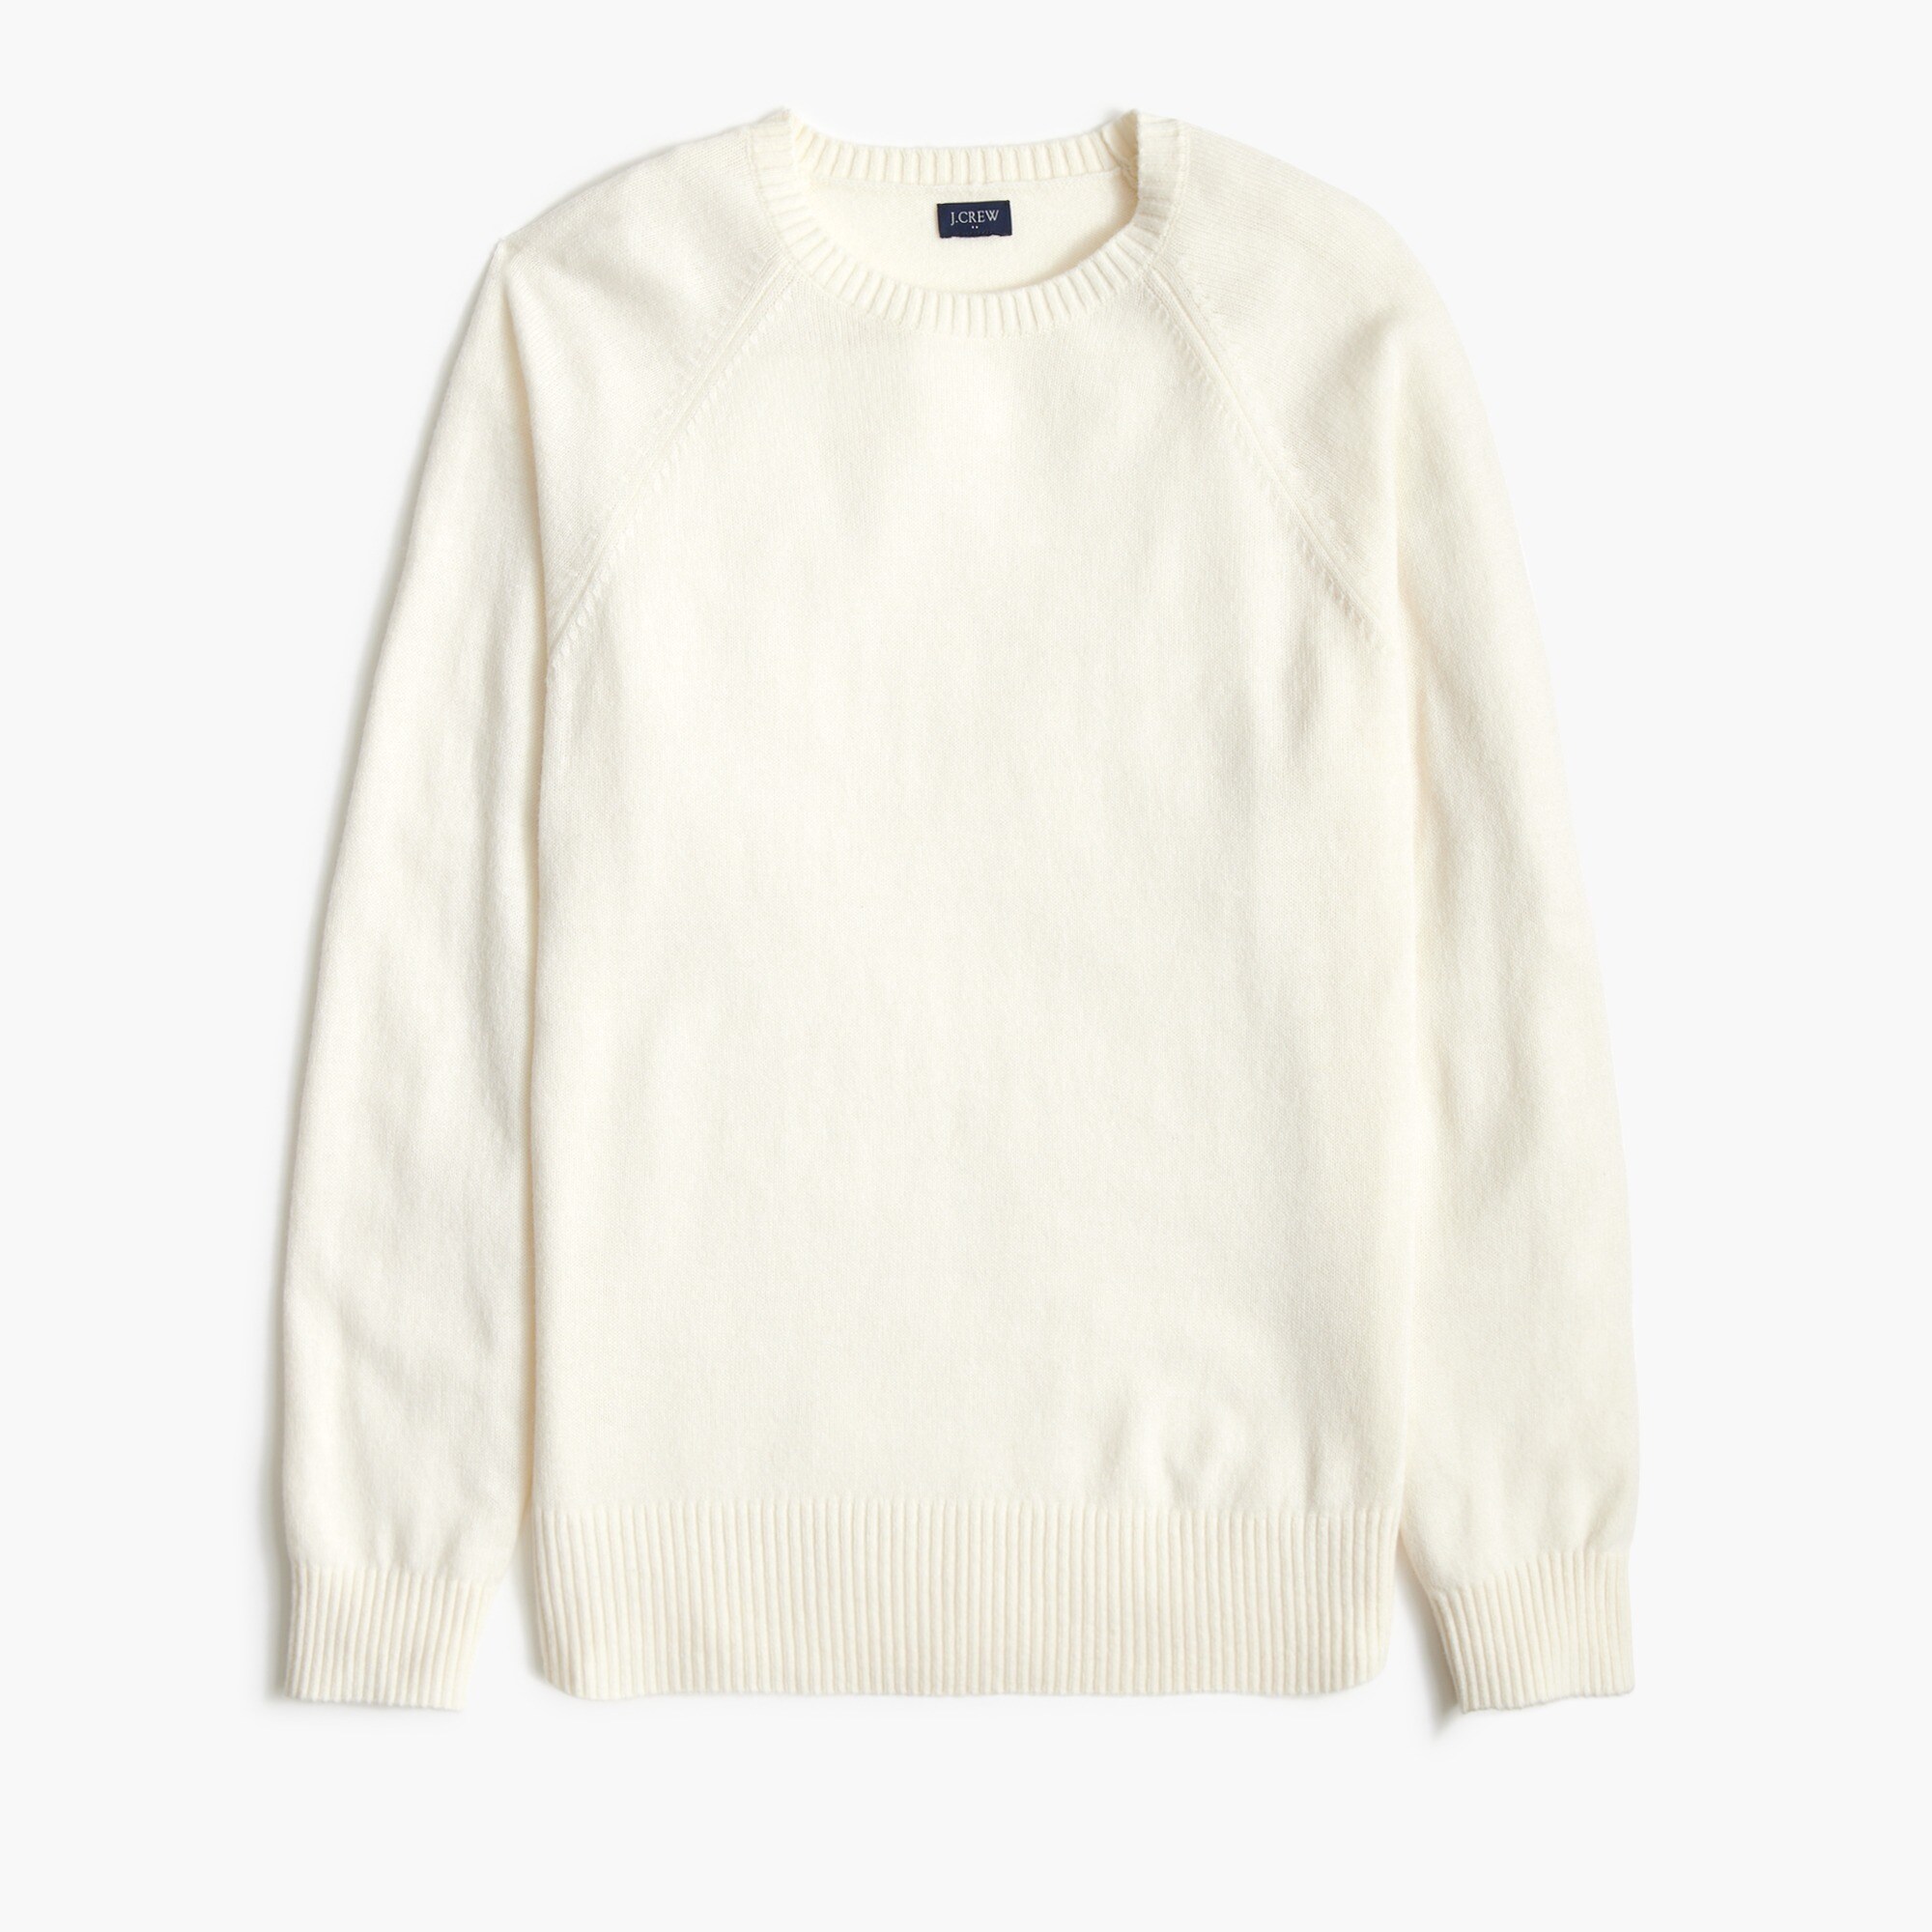  Crewneck sweater in supersoft lambswool blend